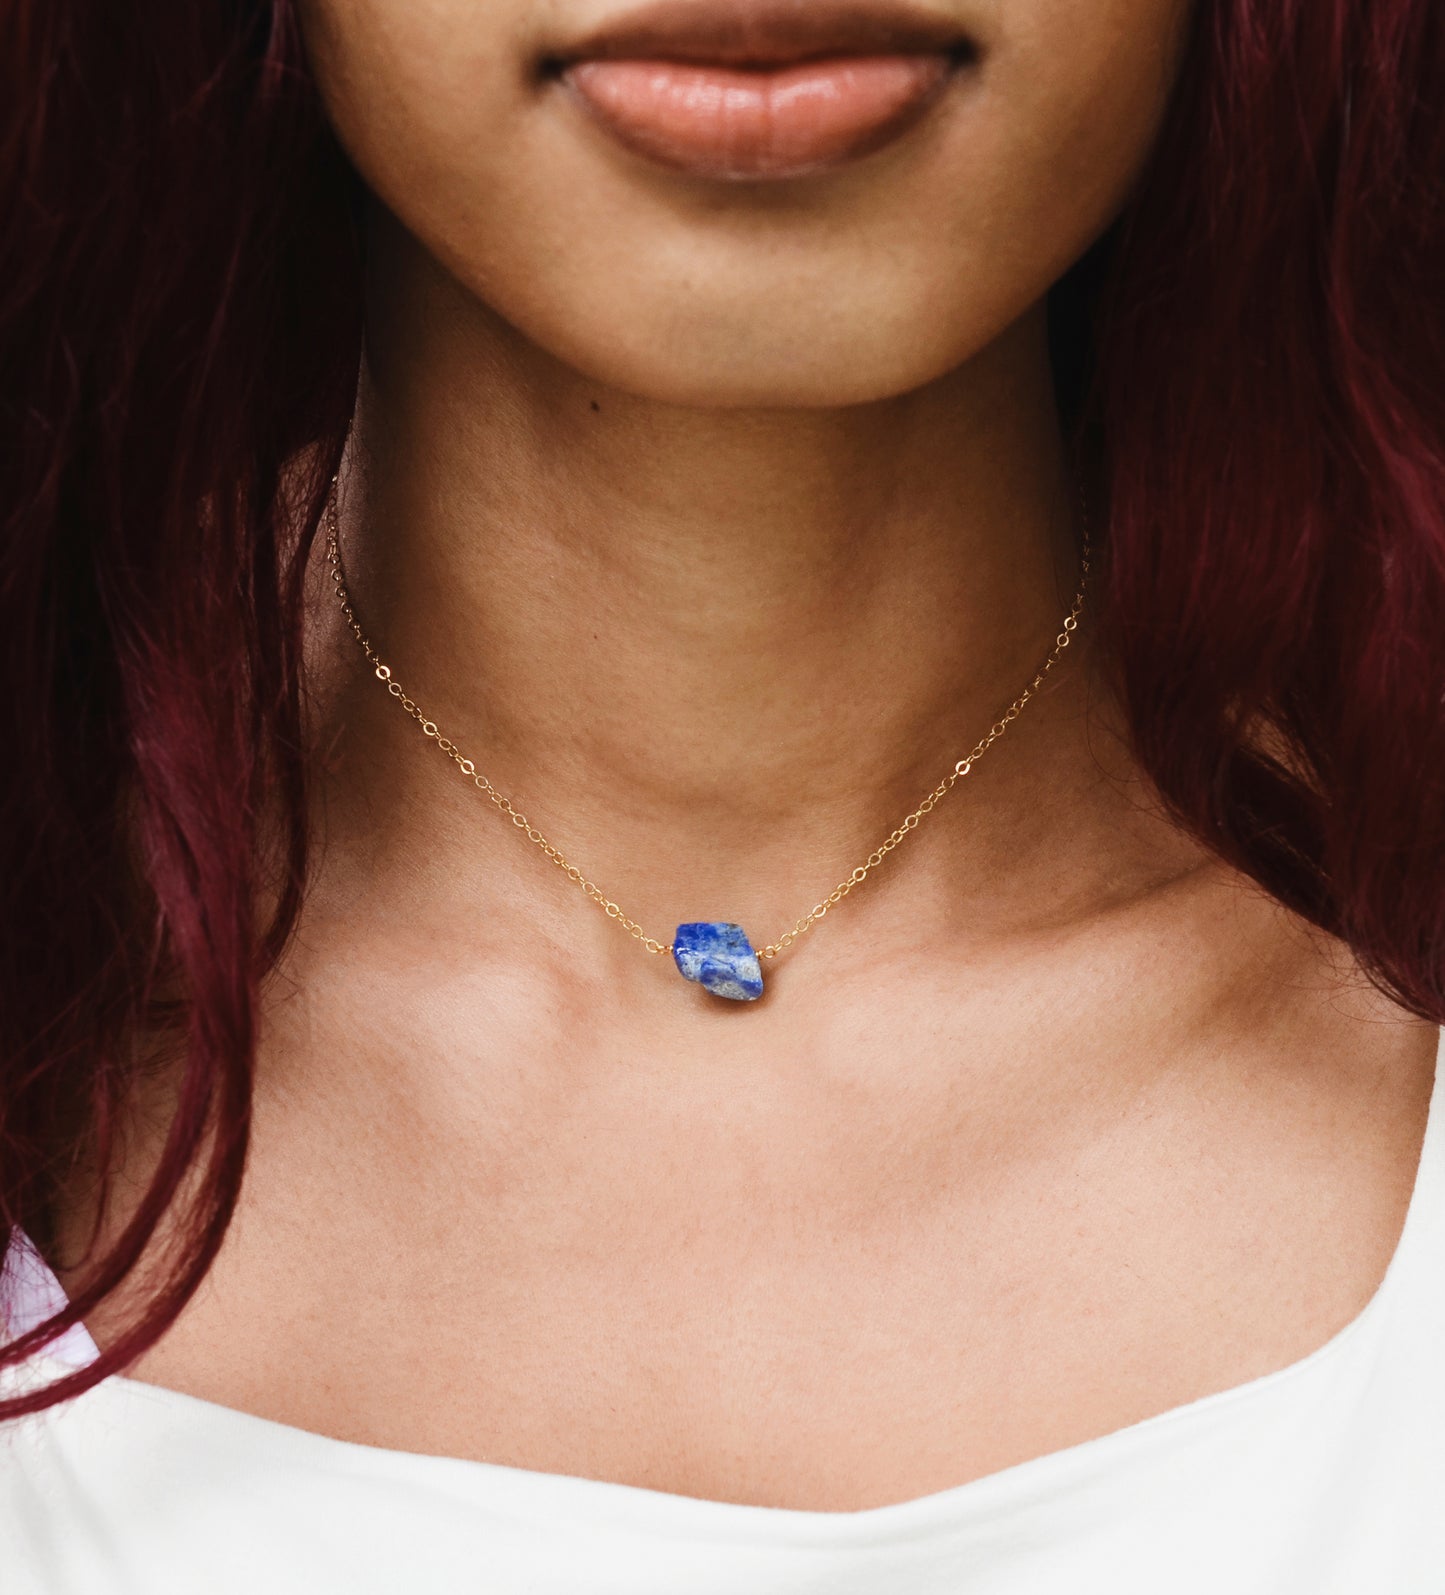 Raw blue lapis lazuli stone suspended from a gold chain. Modeled Image.